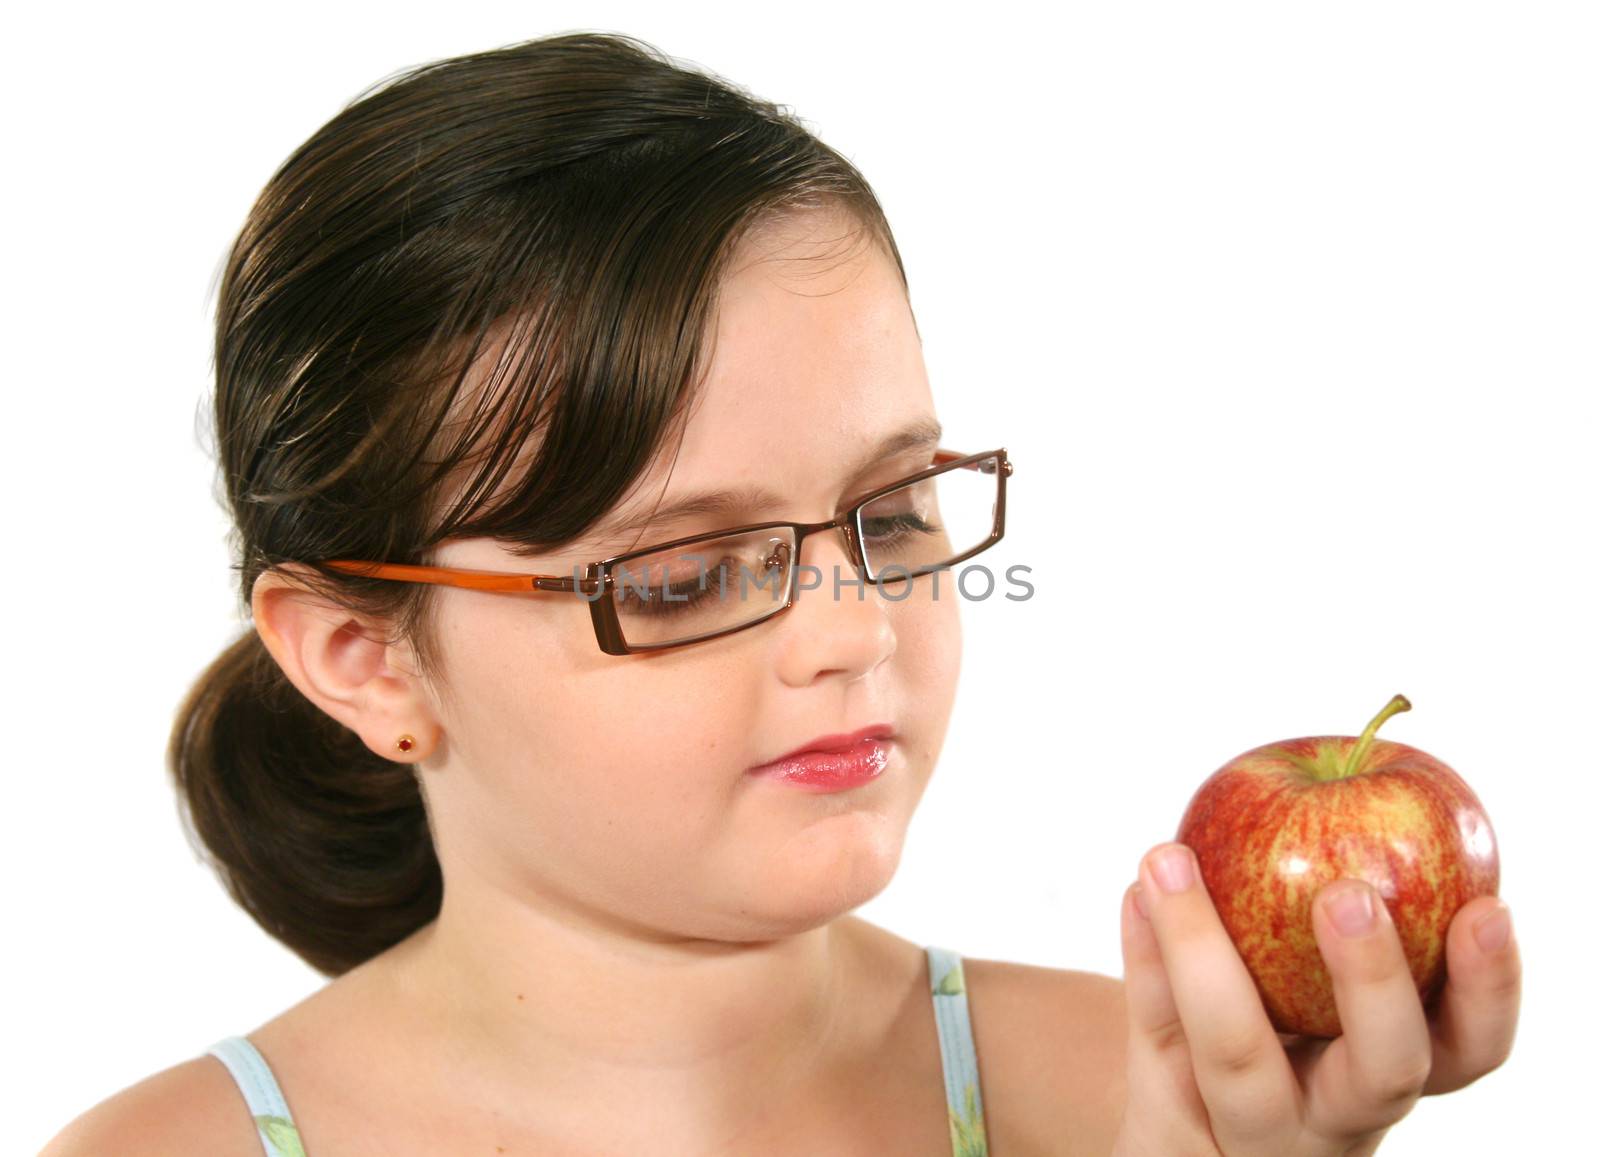 Cute little girl with glasses holding an apple.